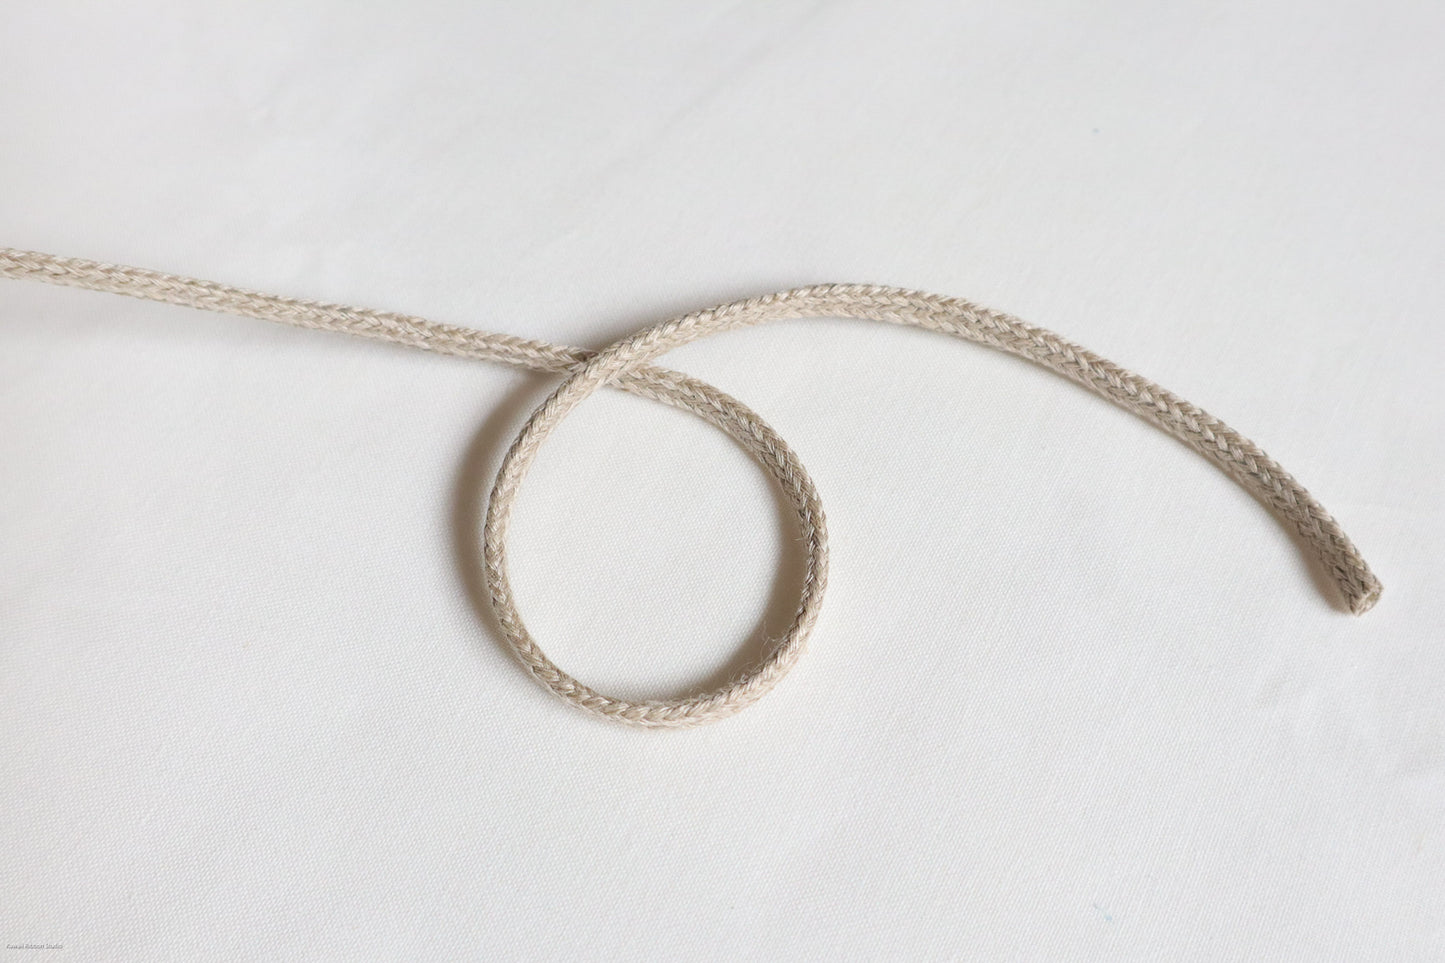 5mm round cord in 100% washed linen